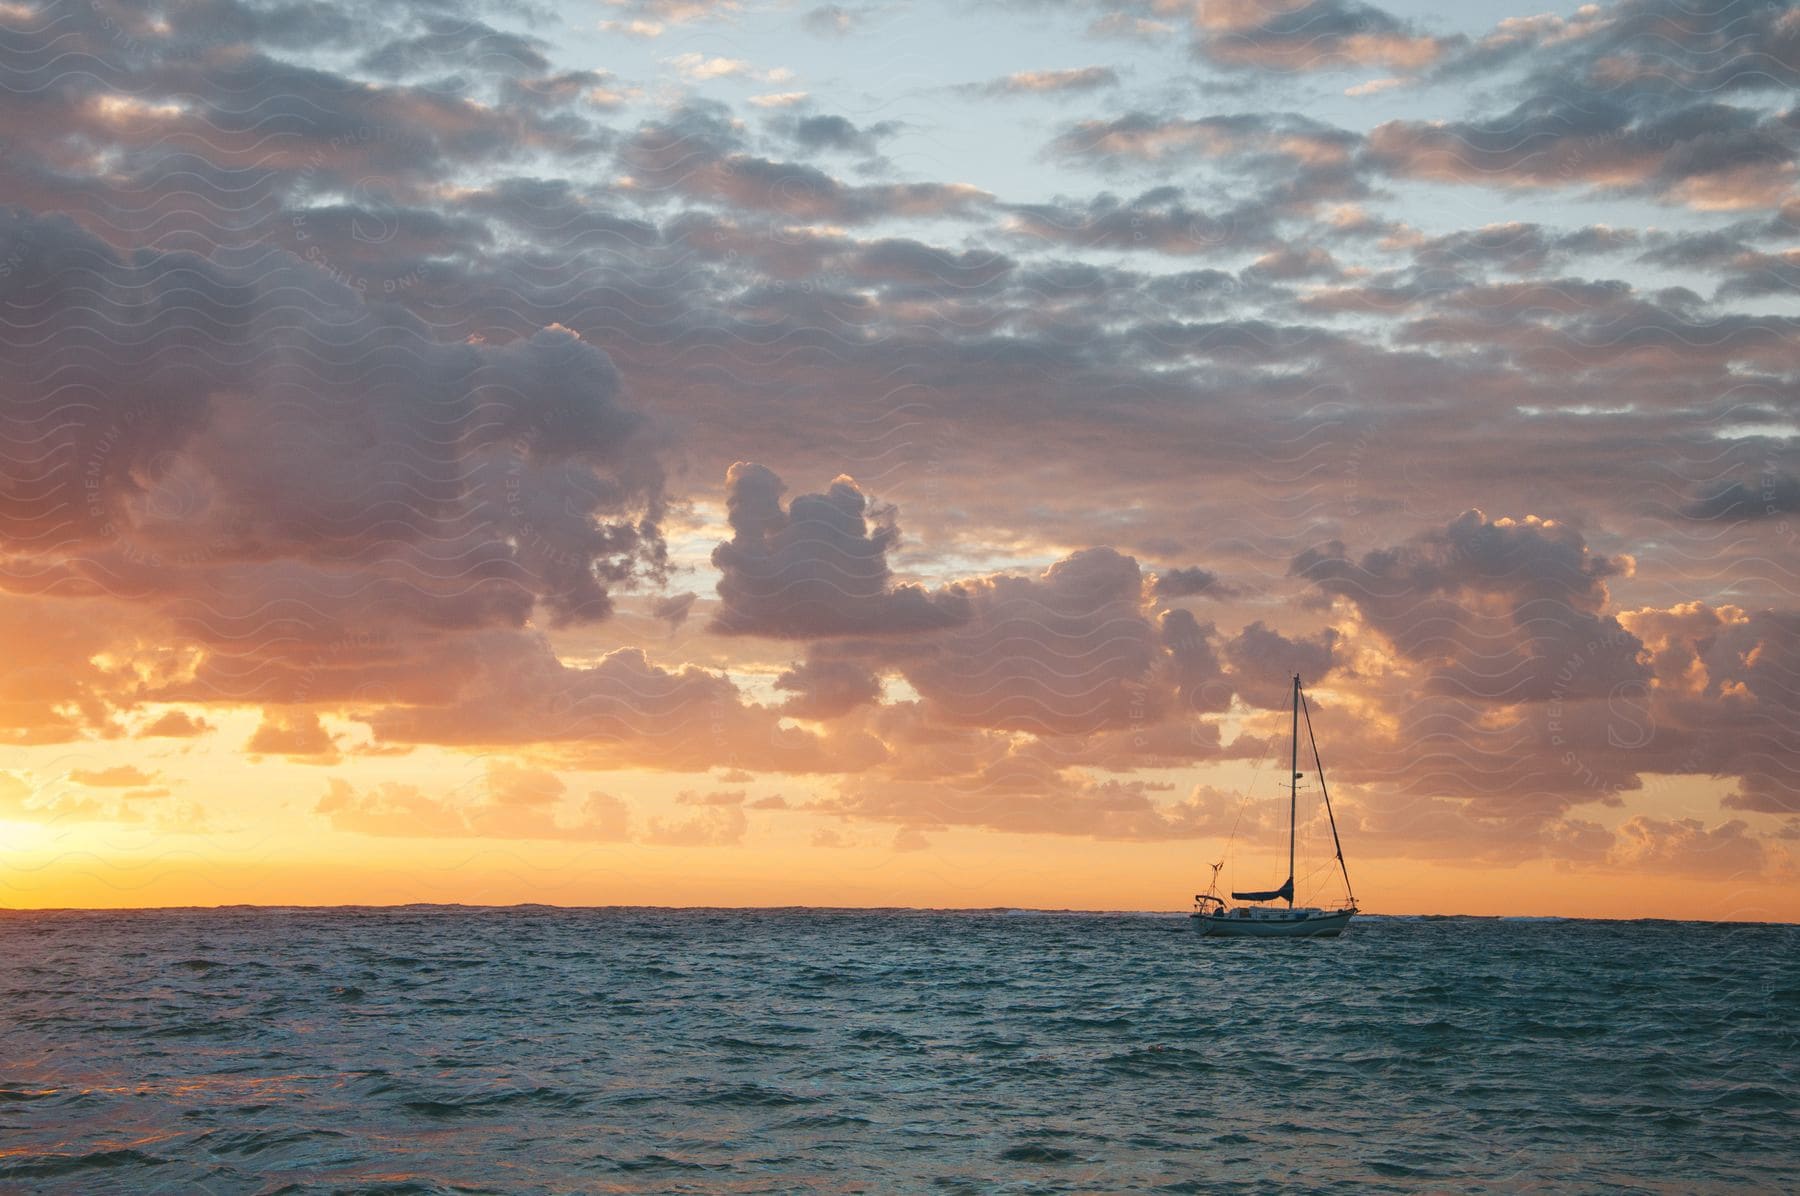 A lone boat sails on the open sea at dawn